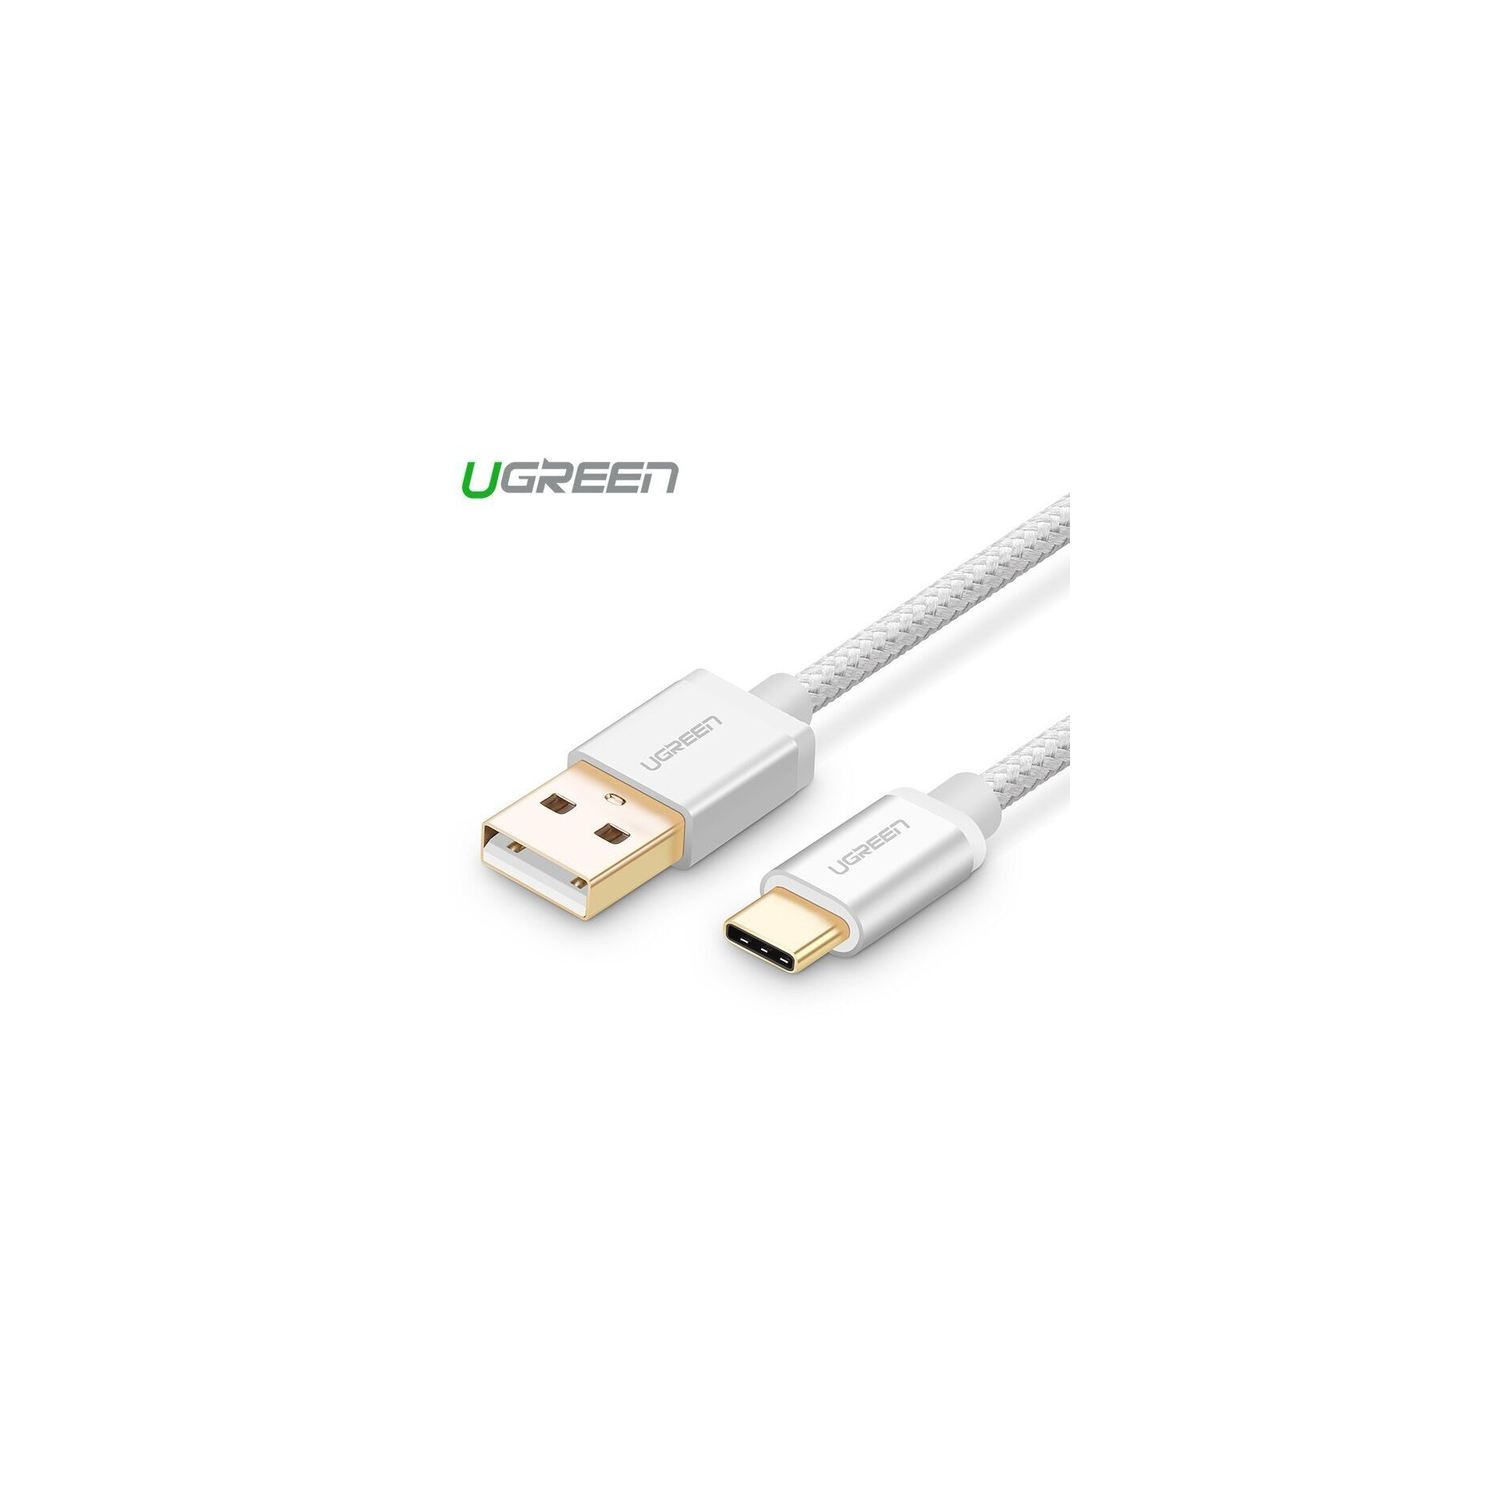 UGREEN USB 2.0 to USB-C cable with nylon webbing